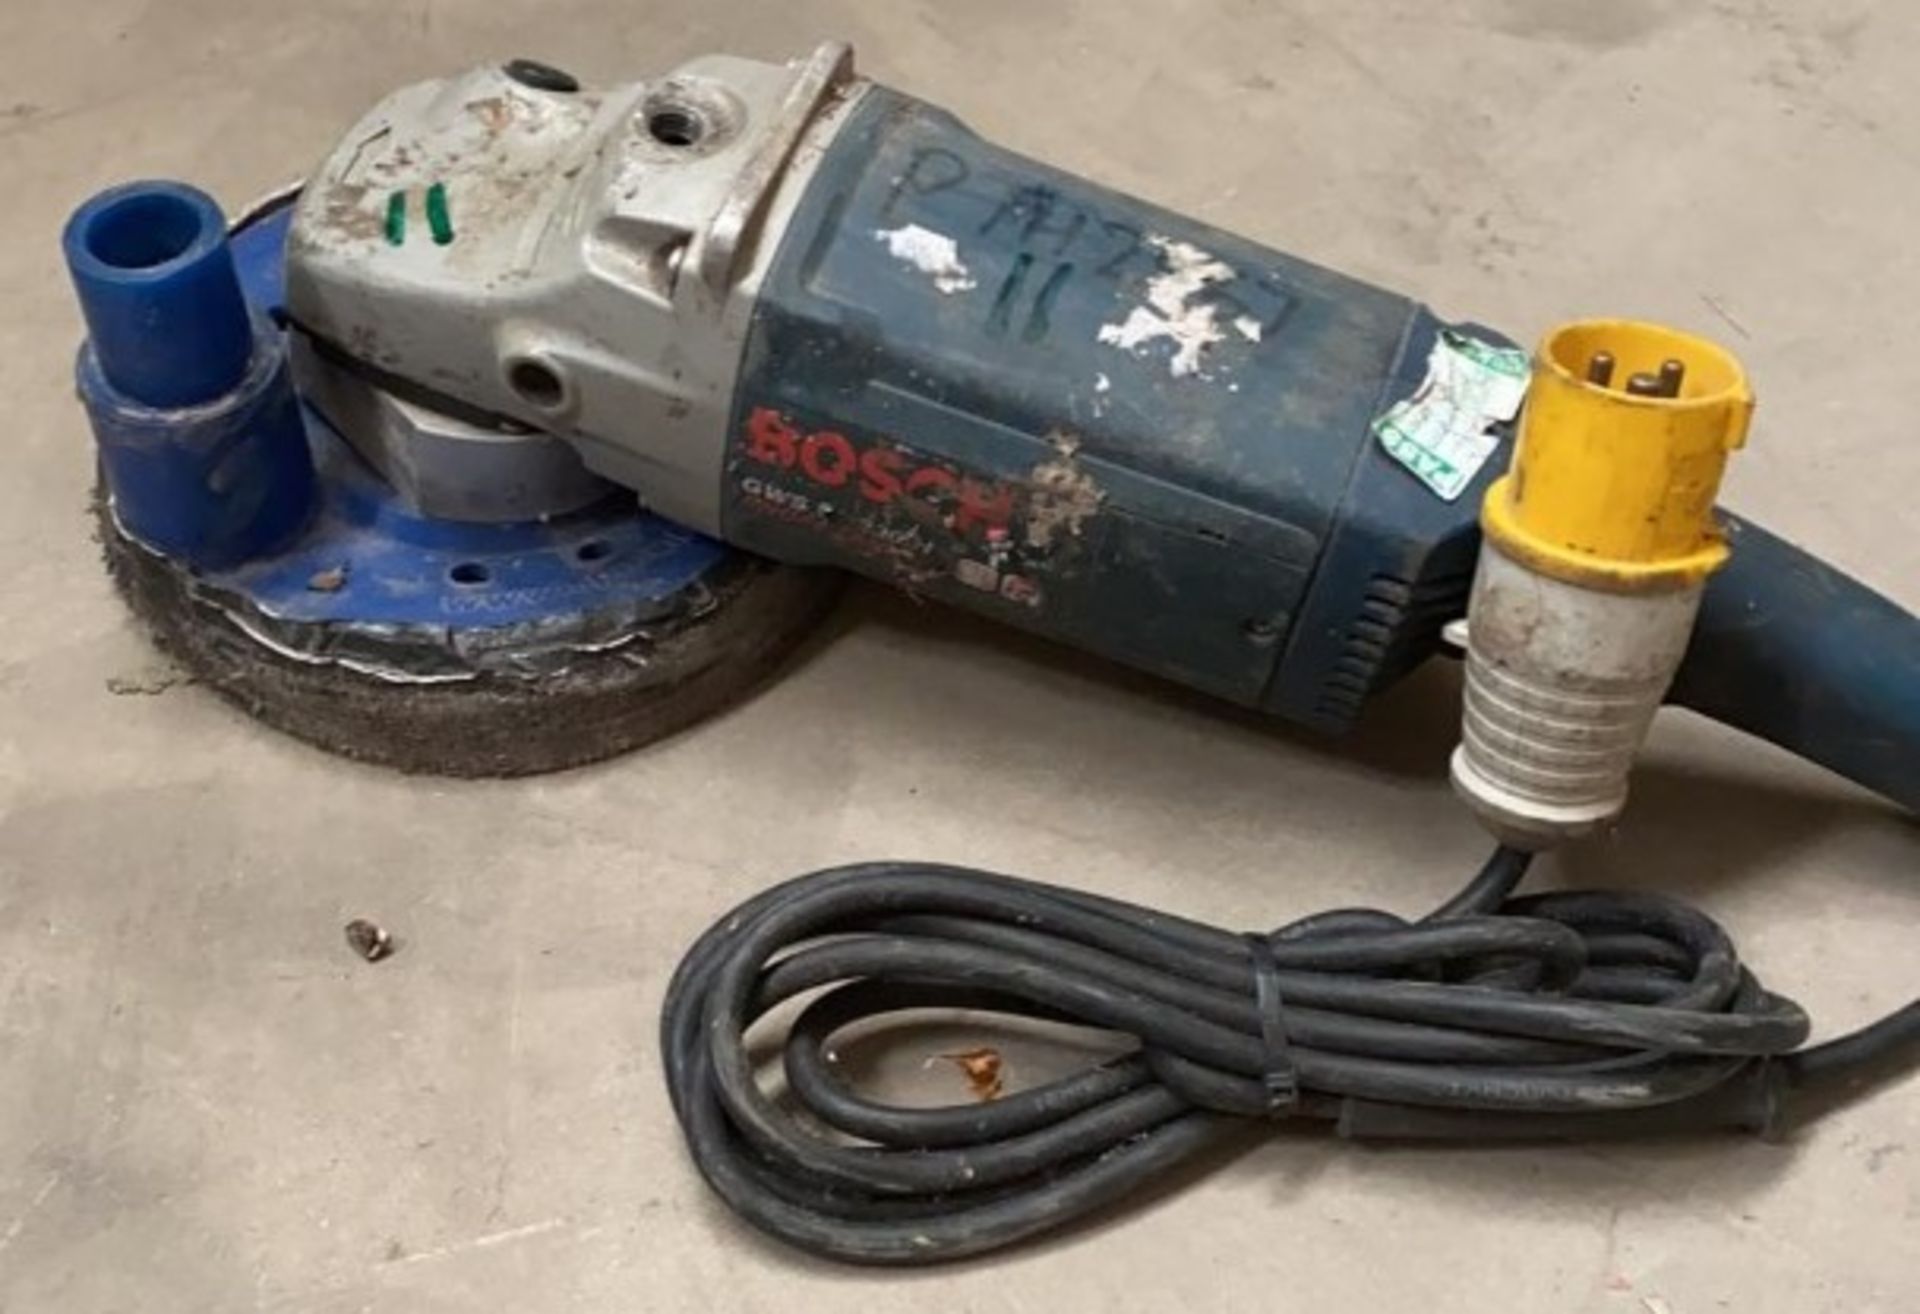 1 x Bosch 110V Grinder - Used, Recently Removed From A Working Site - CL505 - Ref: TL011 - Location: